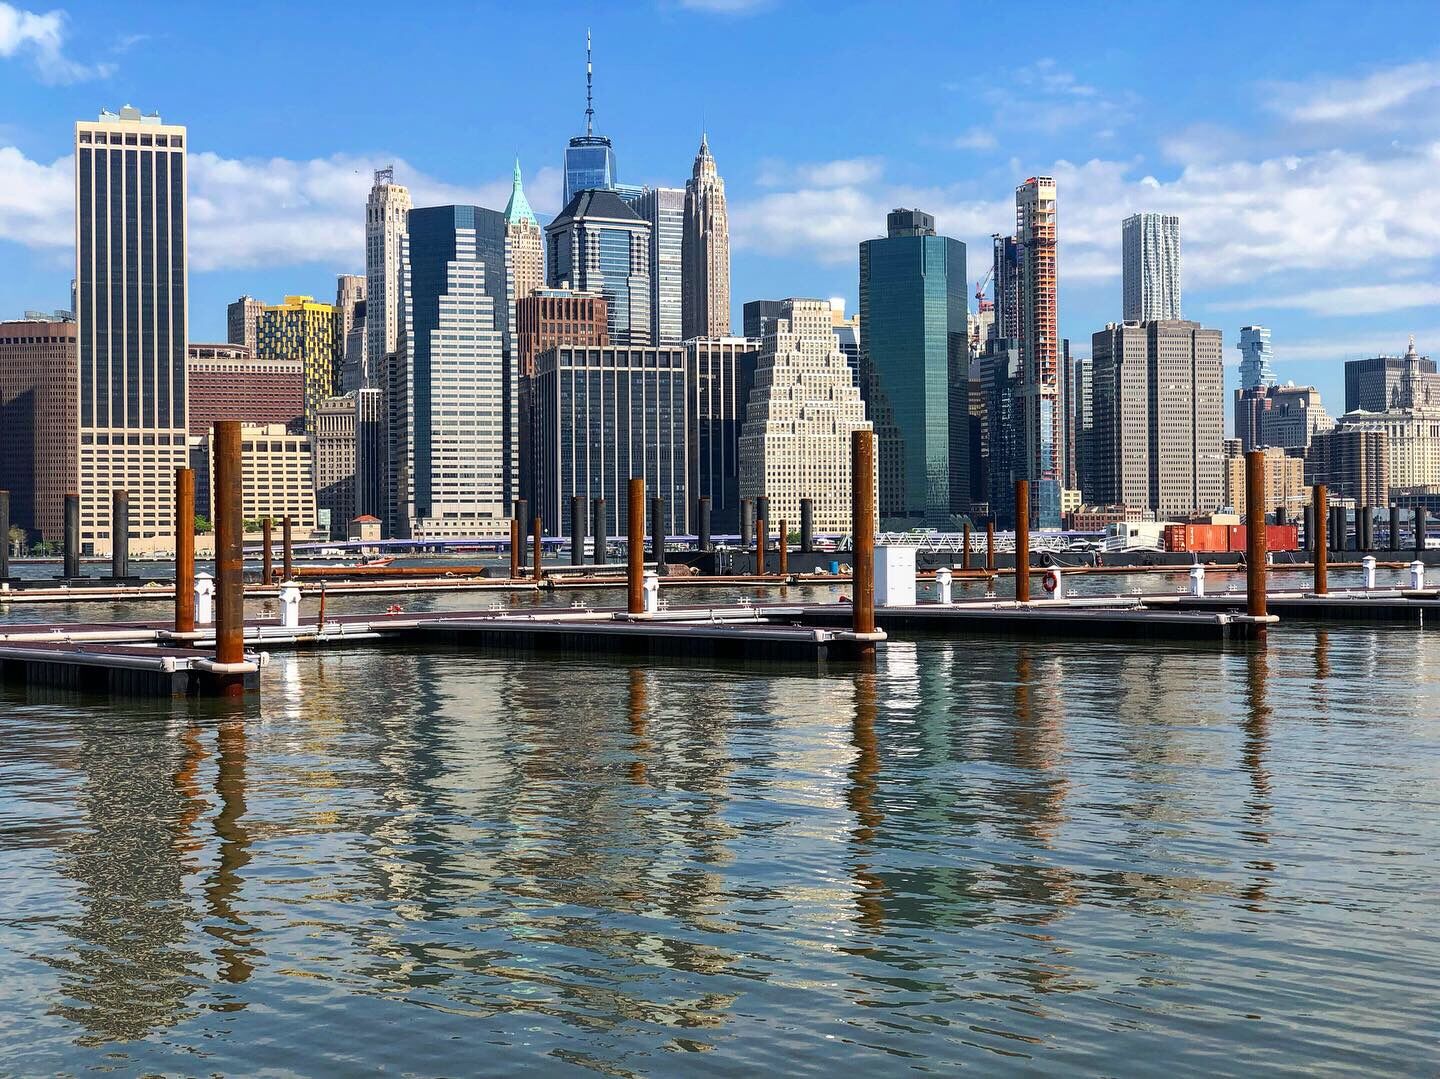 A look at the Manhattan skyline from the new ONE15 Brooklyn Marina, which will offer New York City's best marina views of the upcoming 4th of July Fireworks, according to Deputy CEO Estelle Lau.